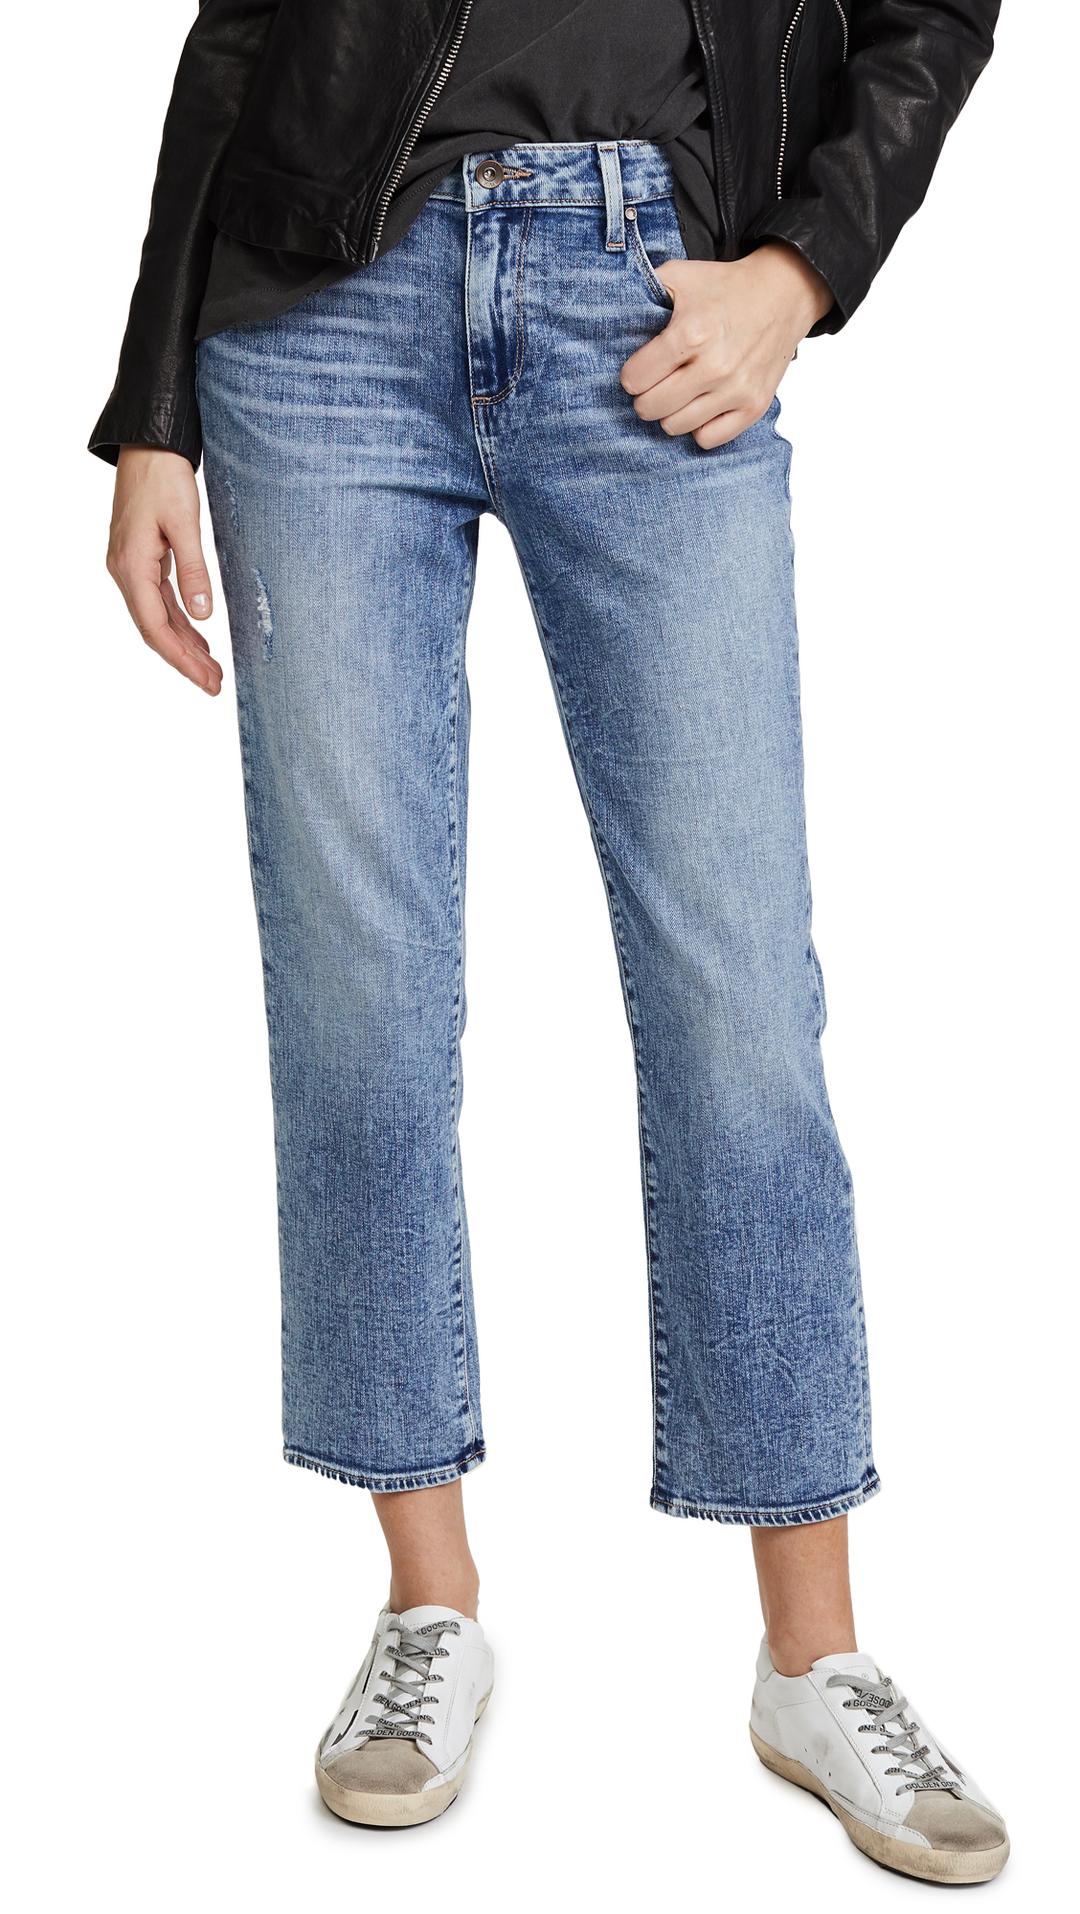 most flattering jeans for wide hips